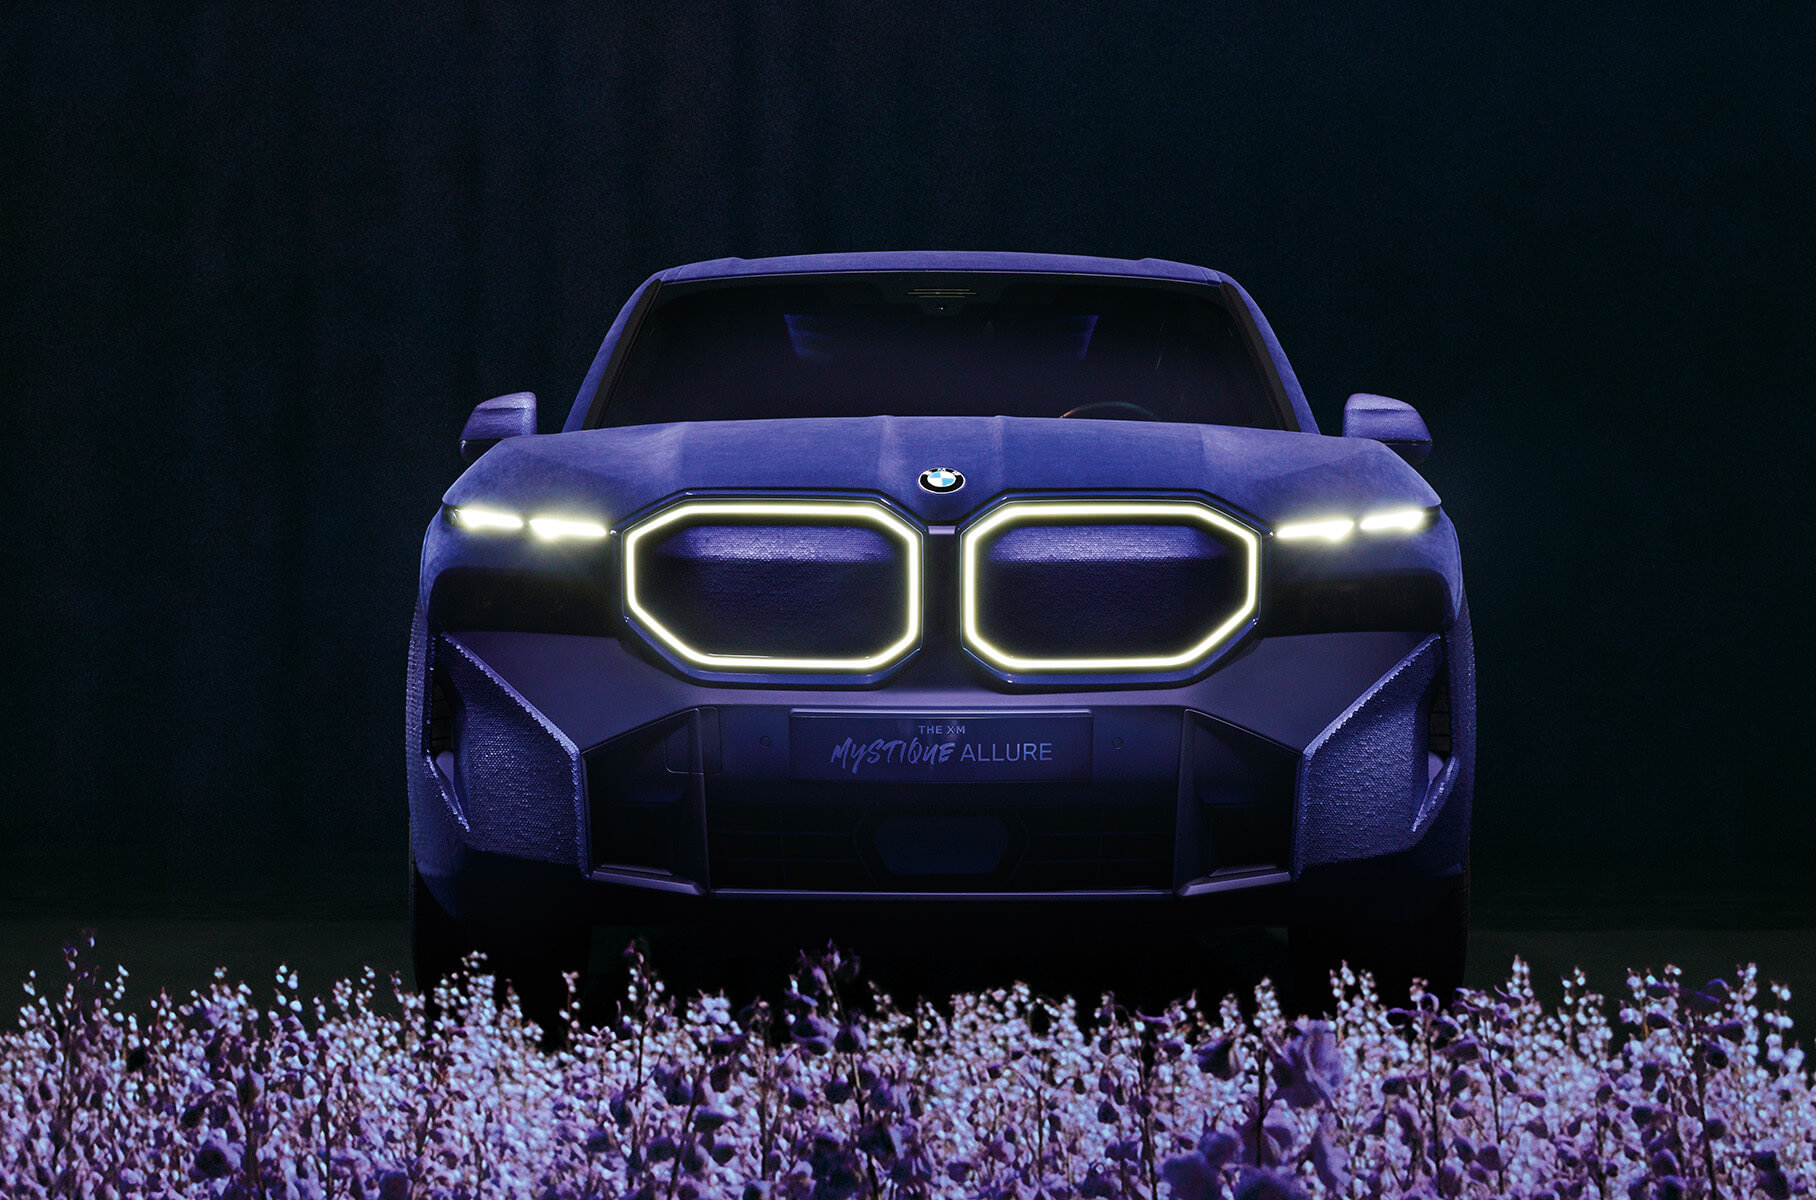 BMW showed the XM hybrid crossover with a purple velvet body